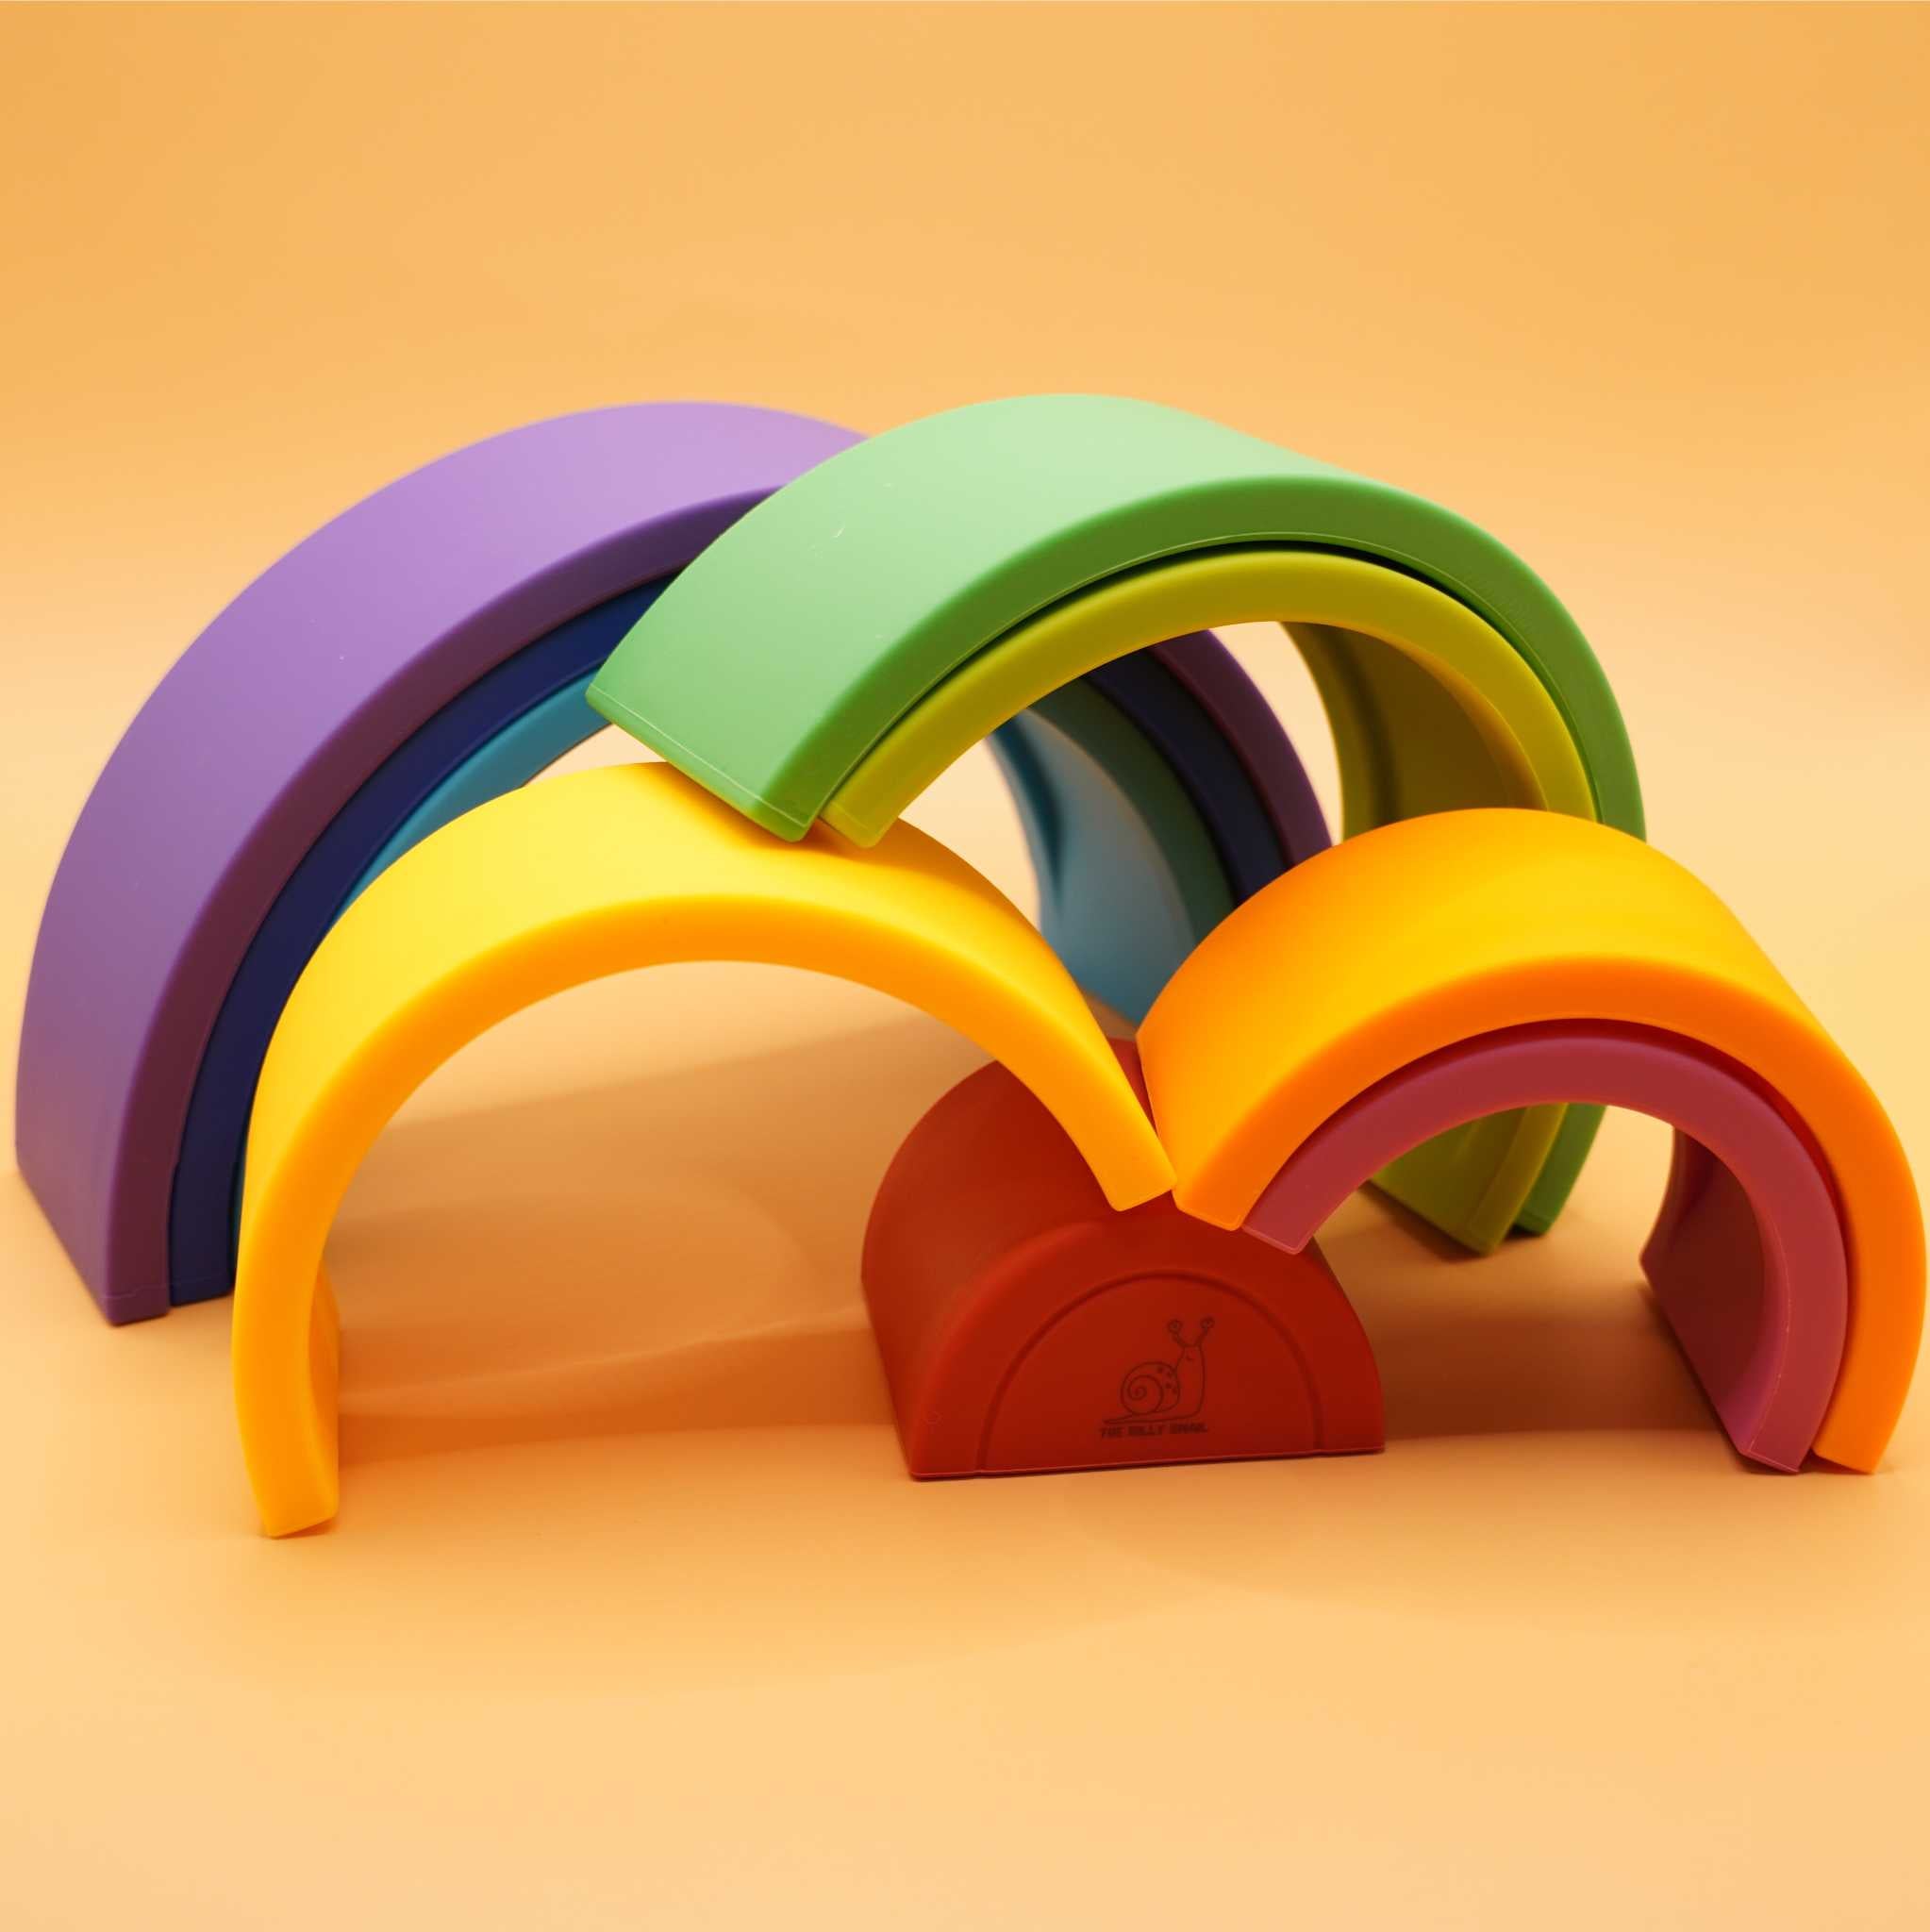 pieces stacked of radiant rainbow silicone stacking toy